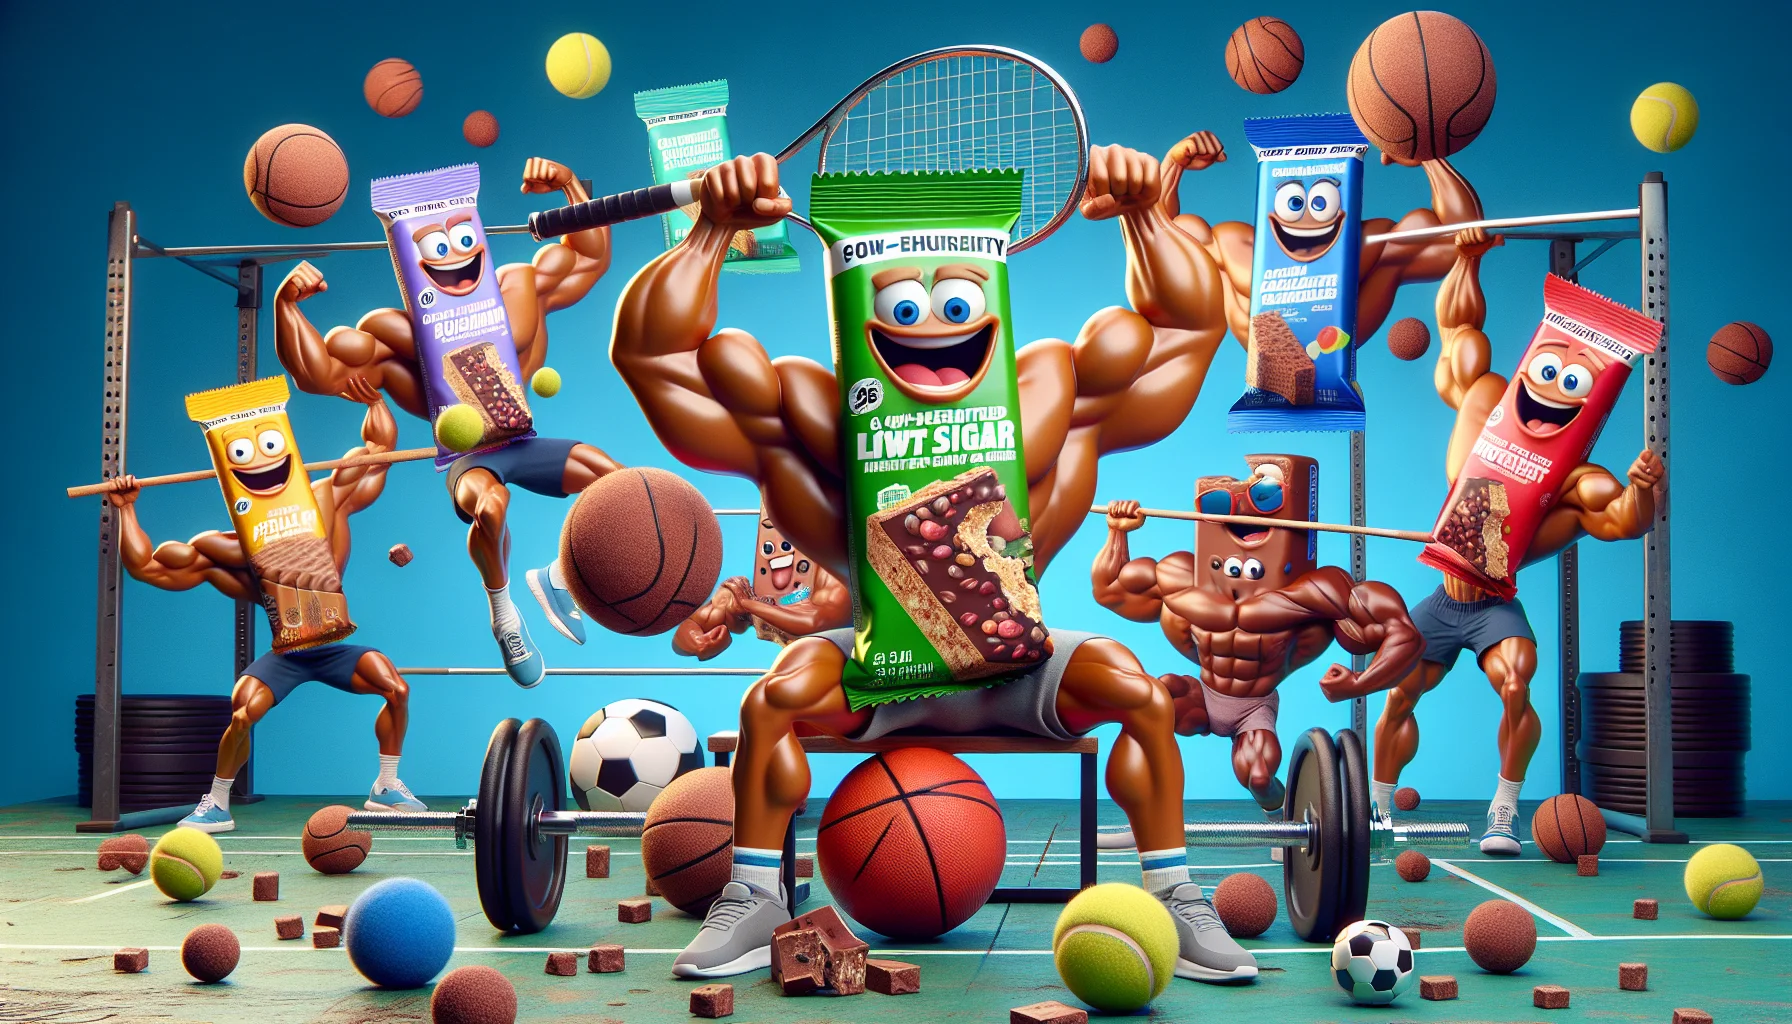 Generate a creatively humorous and hyper-realistic image that features an assortment of top-rated low-sugar protein bars. The bars are set against an amusing backdrop that revolutionizes the way we see sports supplements. Picture this: A group of animated protein bars, each displaying excited facial expressions and flexing arms in a show of muscular strength. They are engaged in various sporting activities such as tennis, soccer, and weight-lifting. The atmosphere is fun and playful, with an engaging display of vibrant colors, aiming to captivate the viewer and highlight the beneficial potential of using these bars as sports supplements.